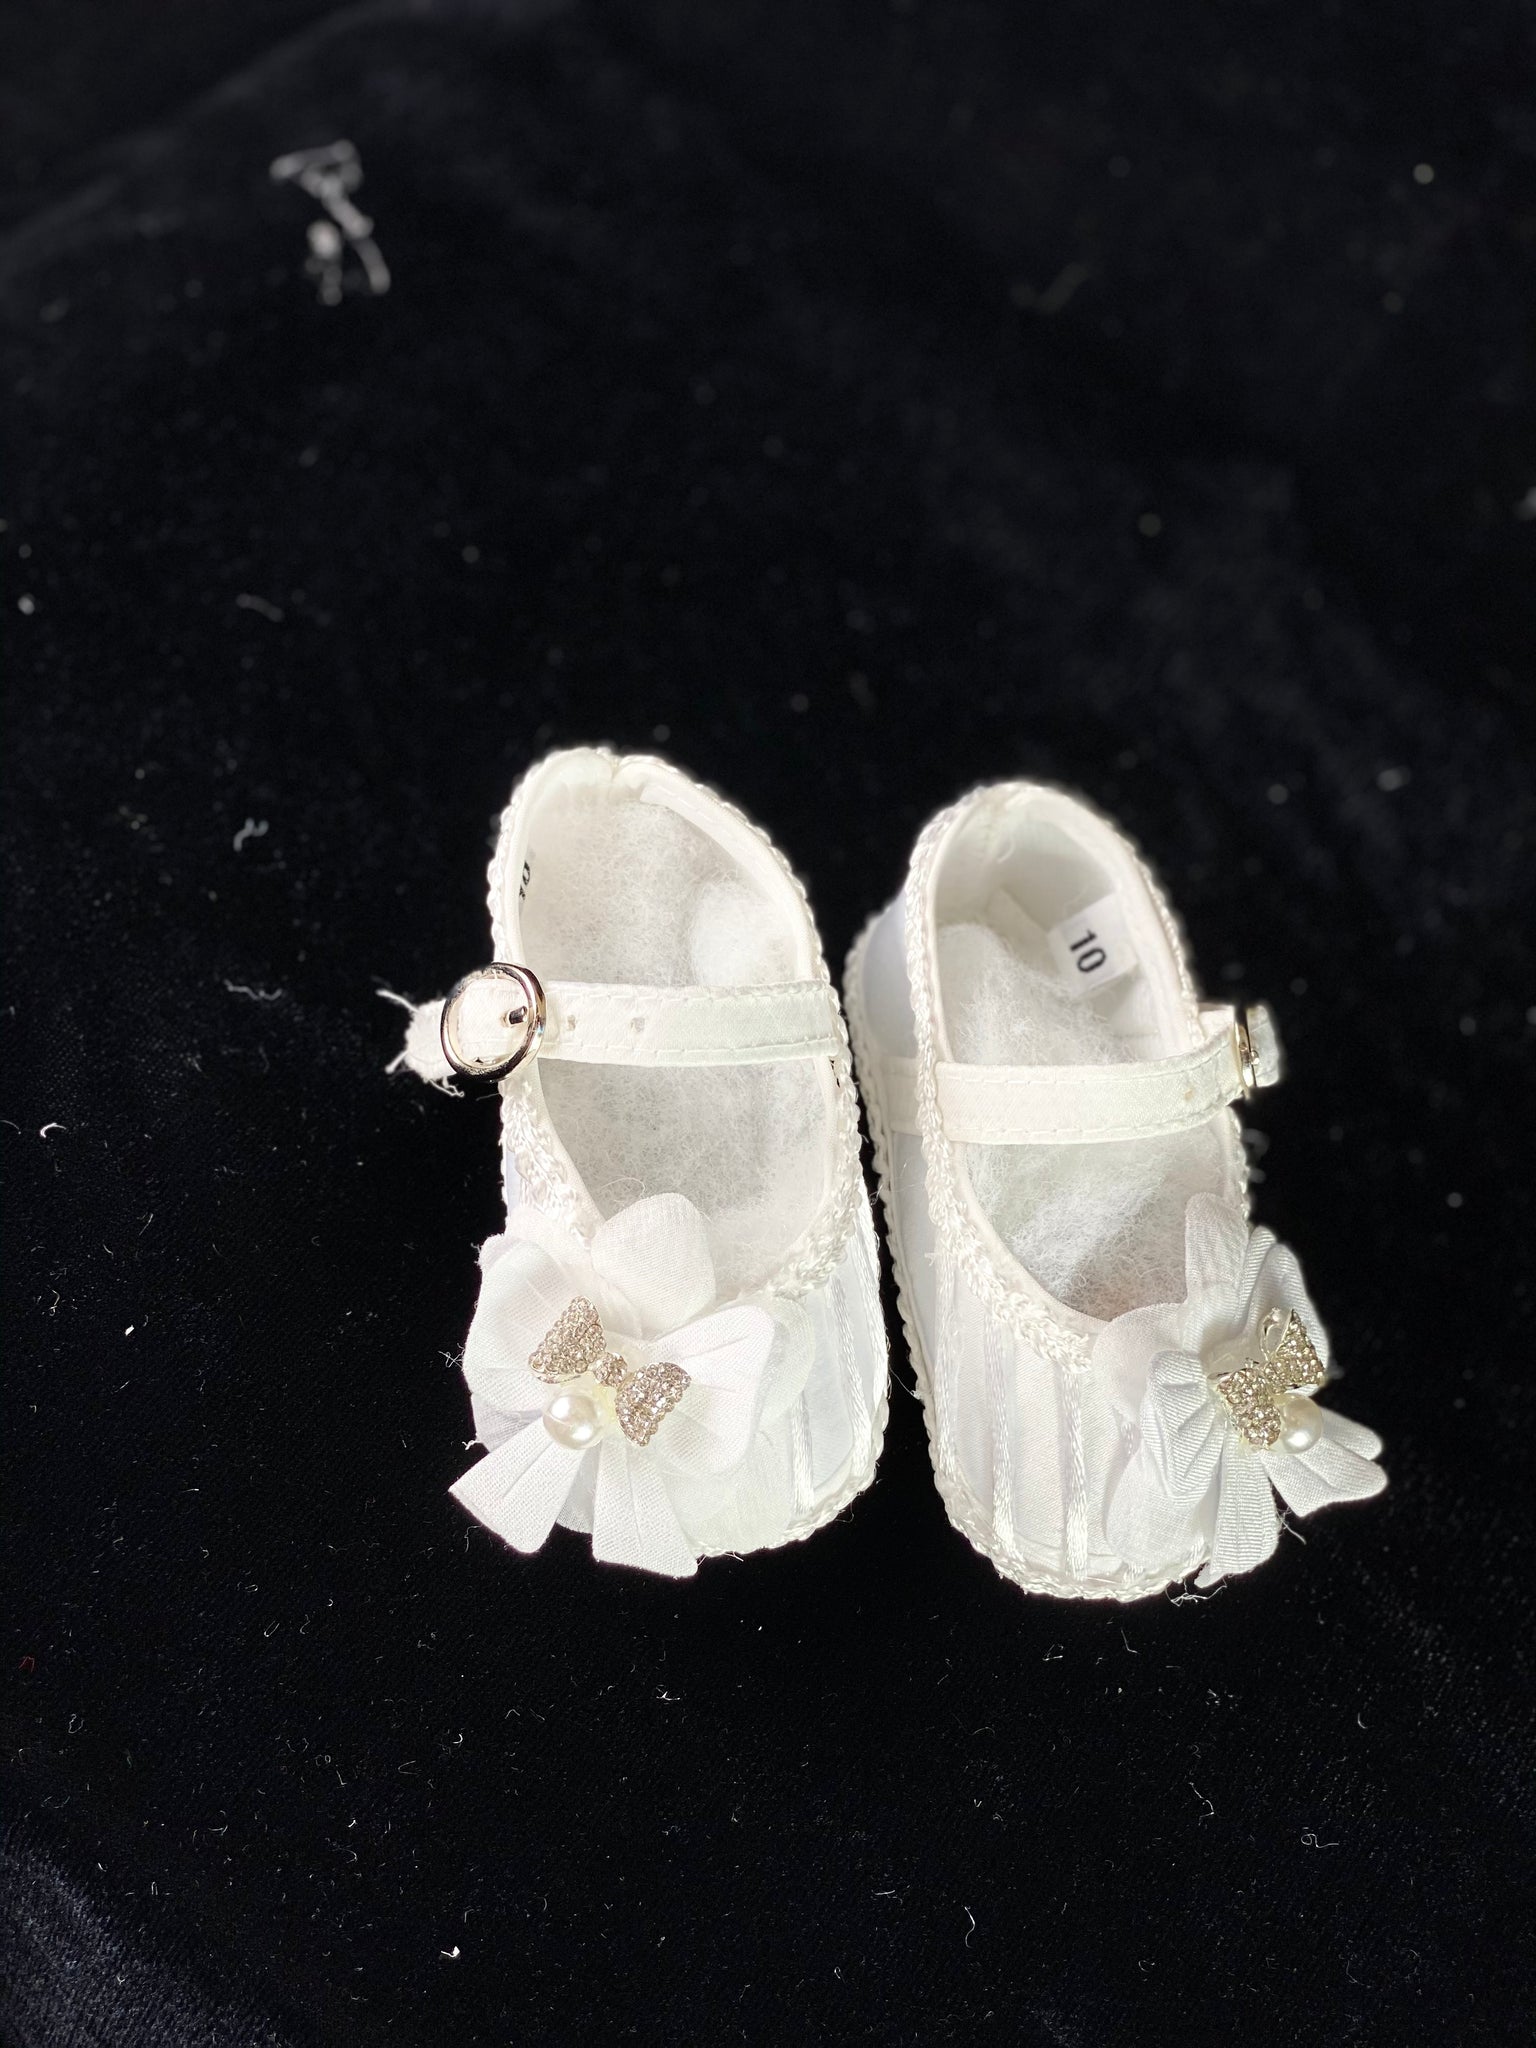 Elegant handmade white baby girl shoes with embroidery, lace, bows, and jewels (pearls and crystals).